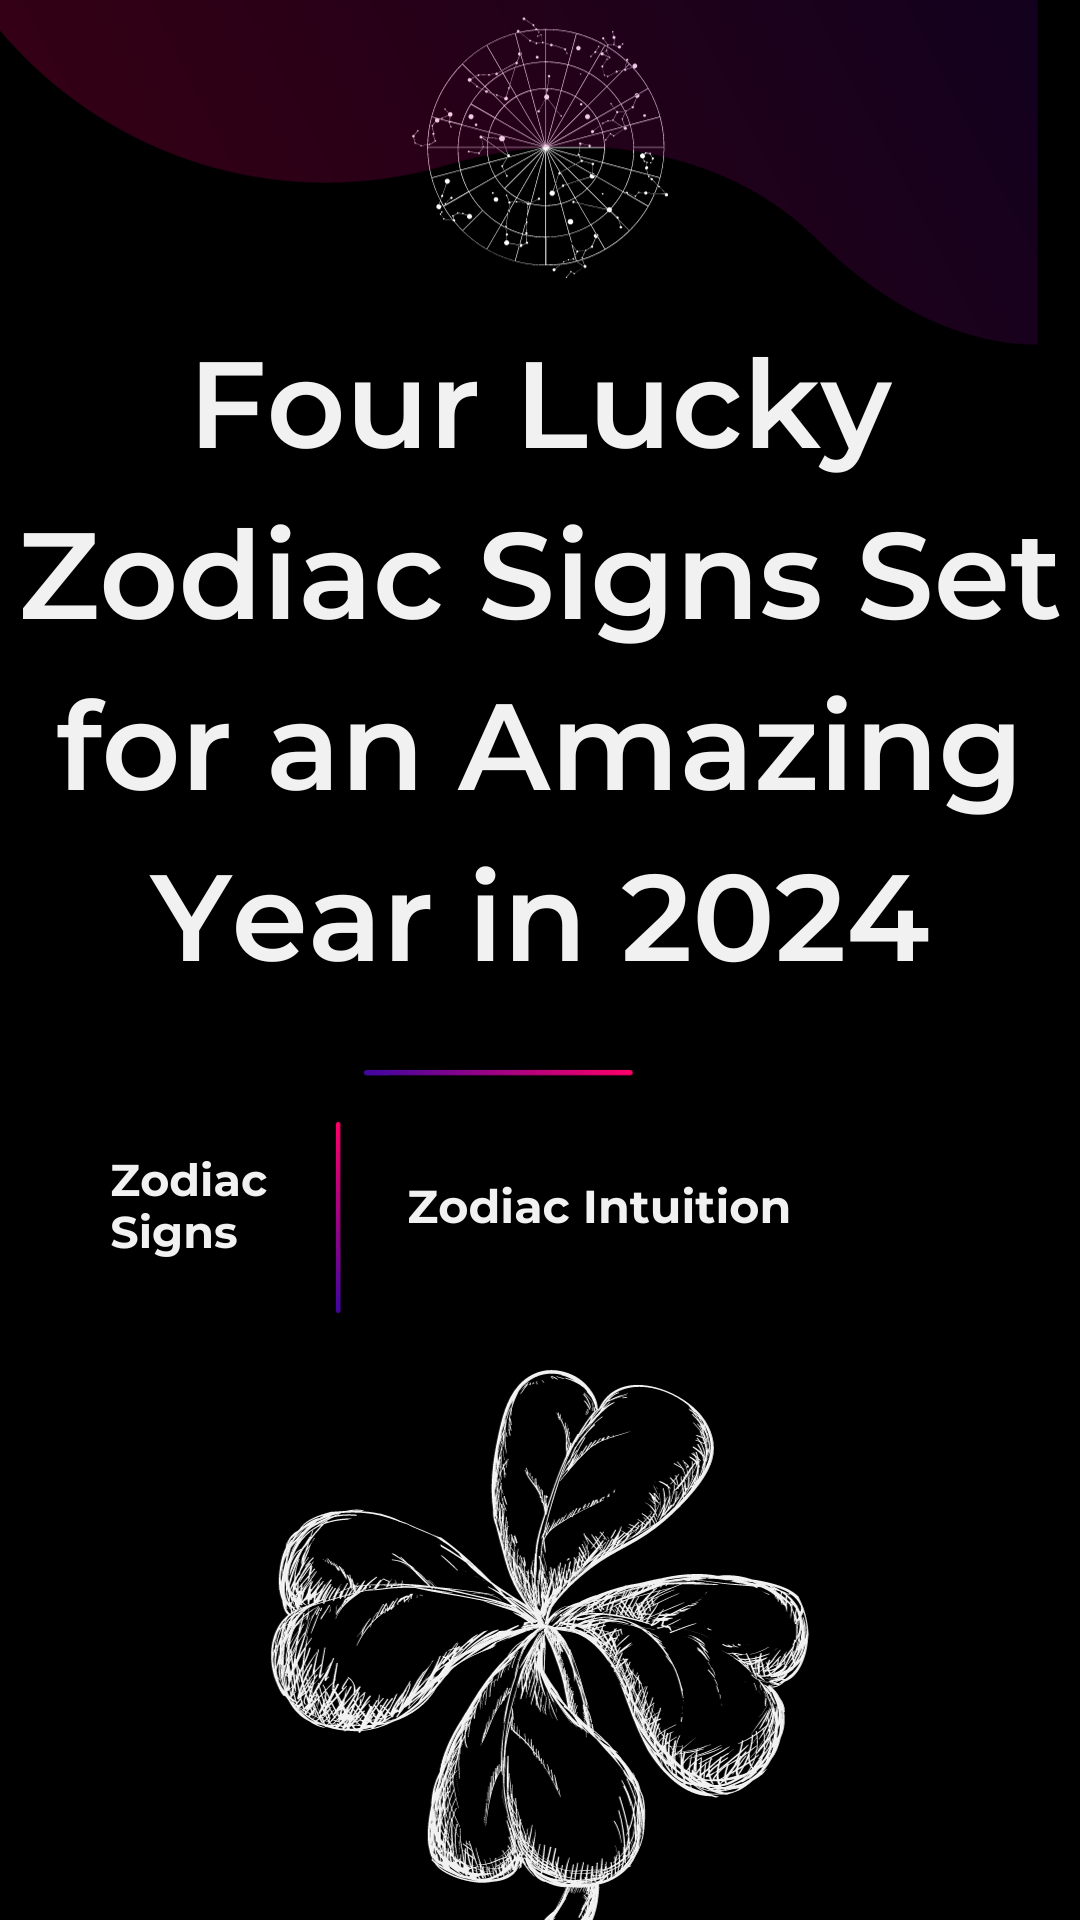 Four Lucky Zodiac Signs Set for an Amazing Year in 2024